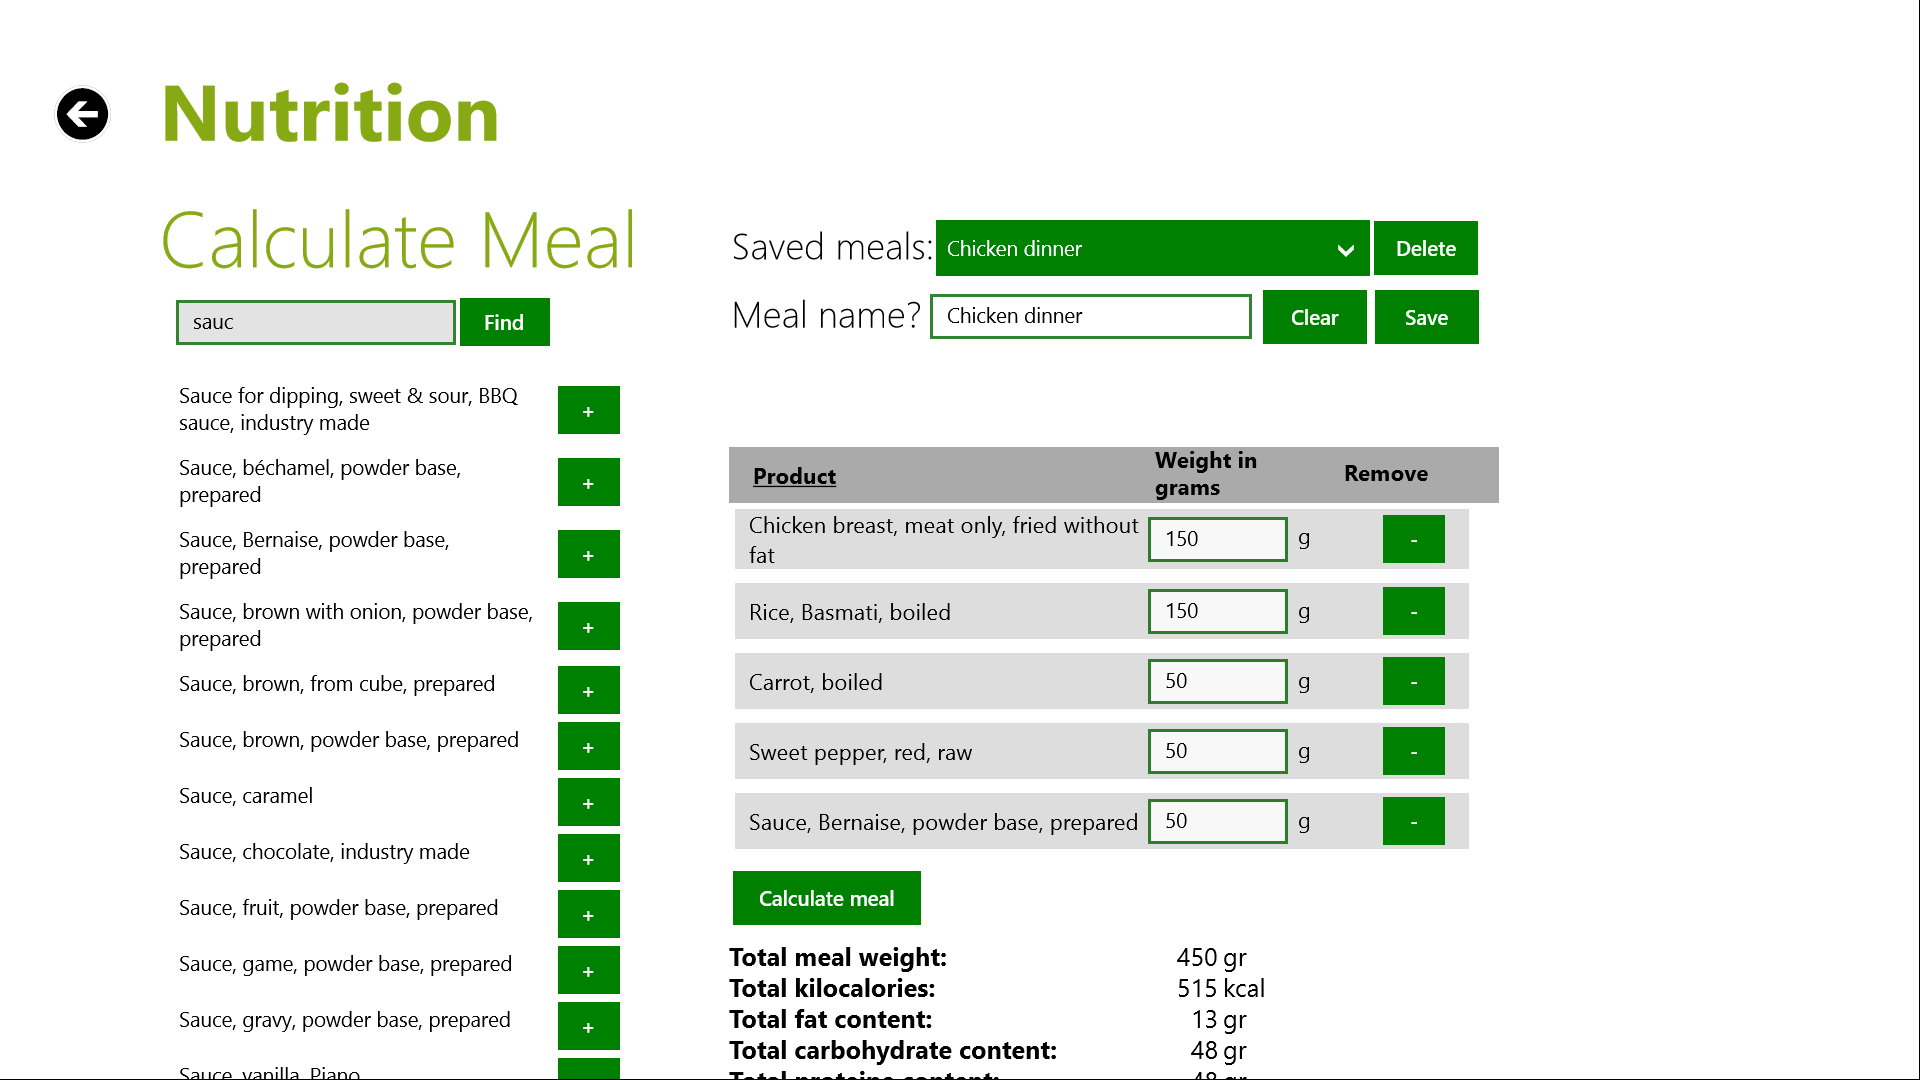 Calculate complete meals and save them